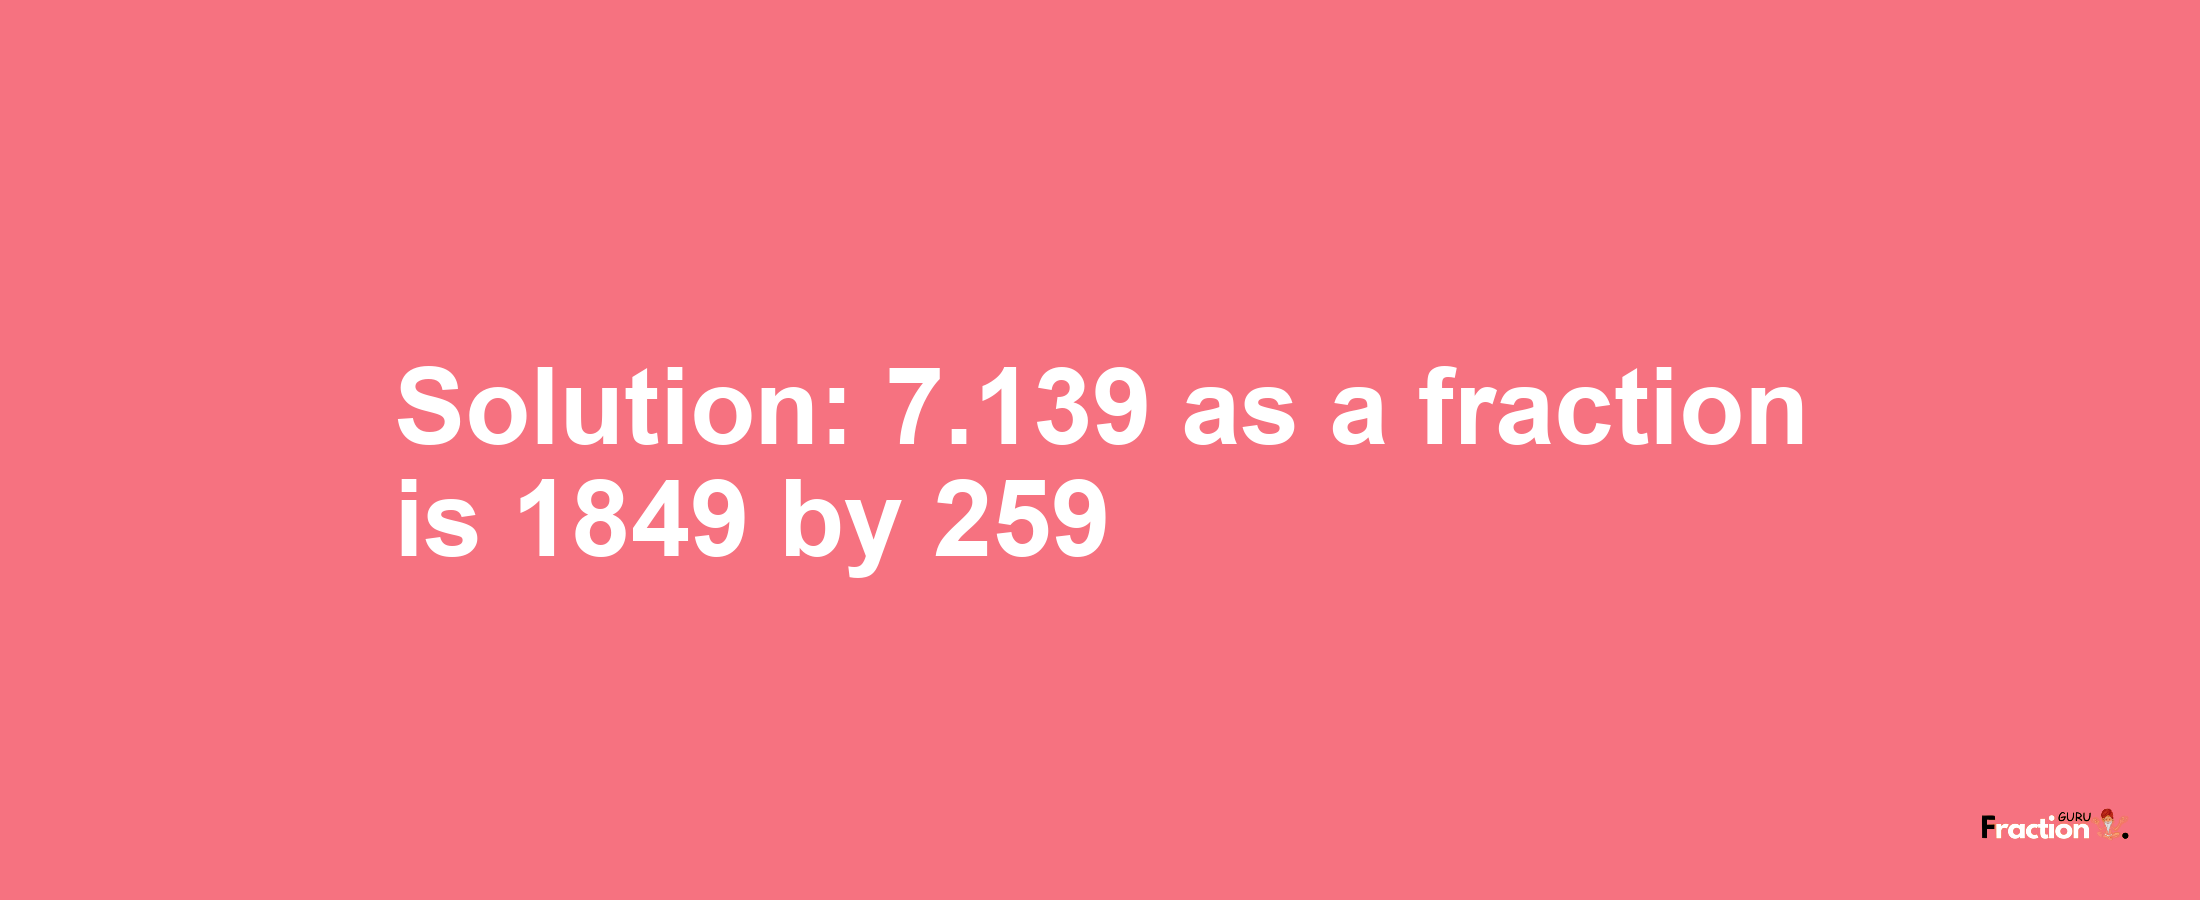 Solution:7.139 as a fraction is 1849/259